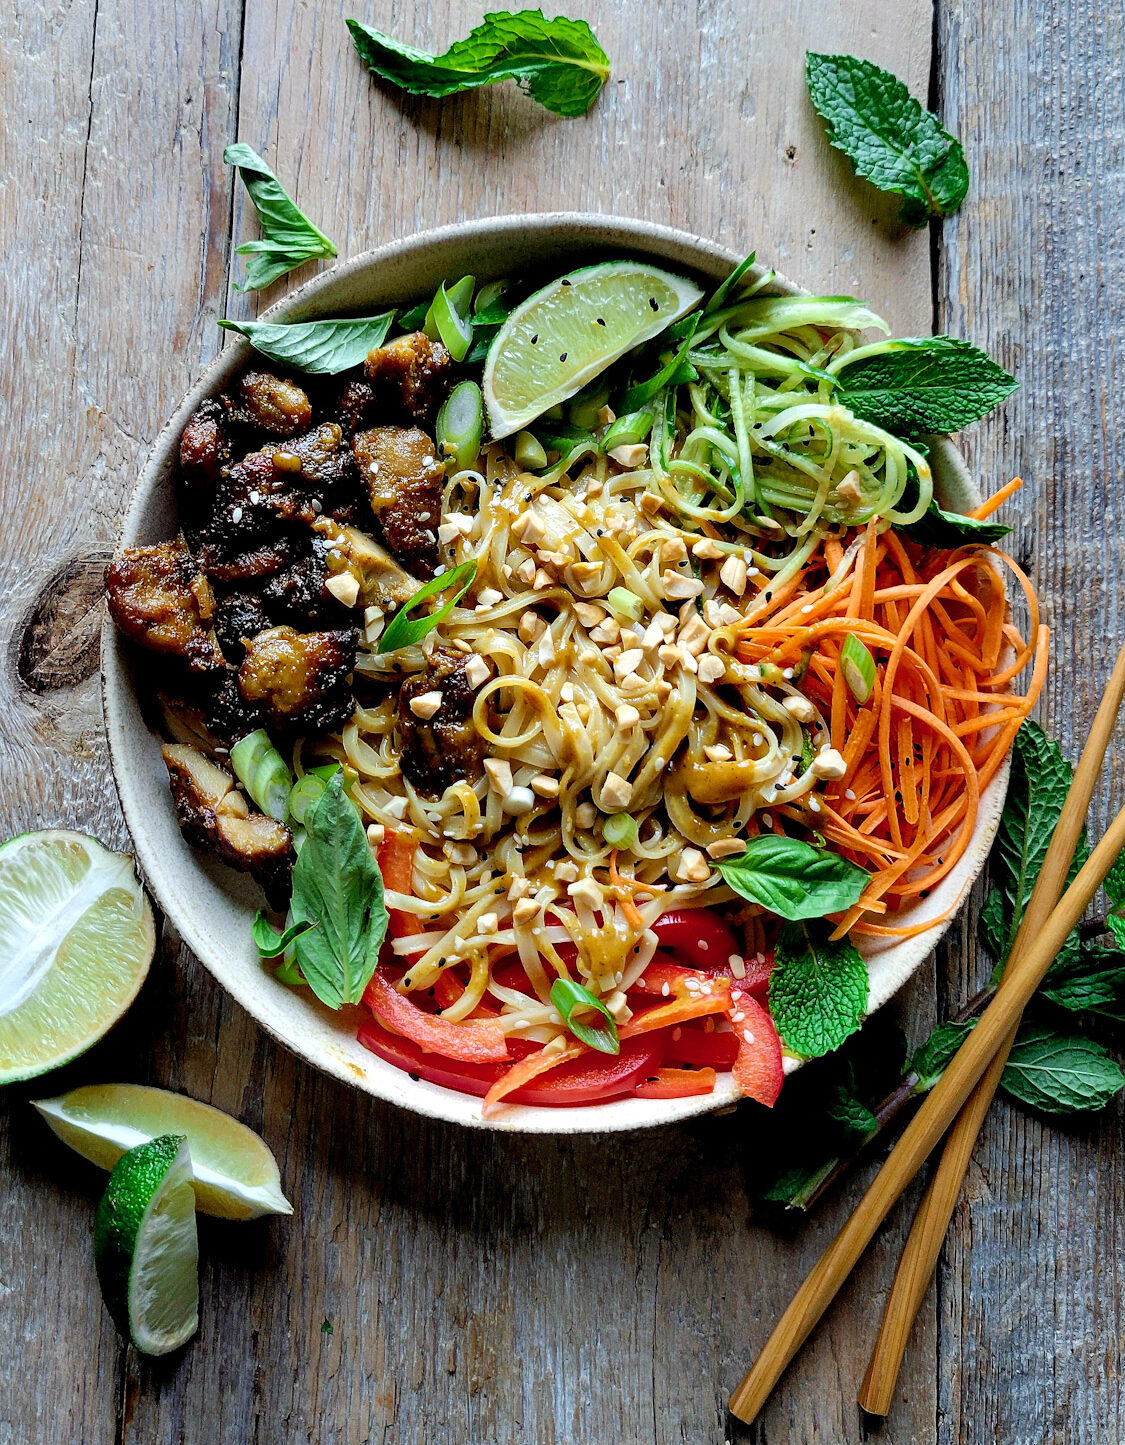 A Bowl filled with Chicken Satay, Peanut Noodles, and vegetables to create a flavour packed Satay Noodle Bowl in on the table, with mint leaves and limes to the side.